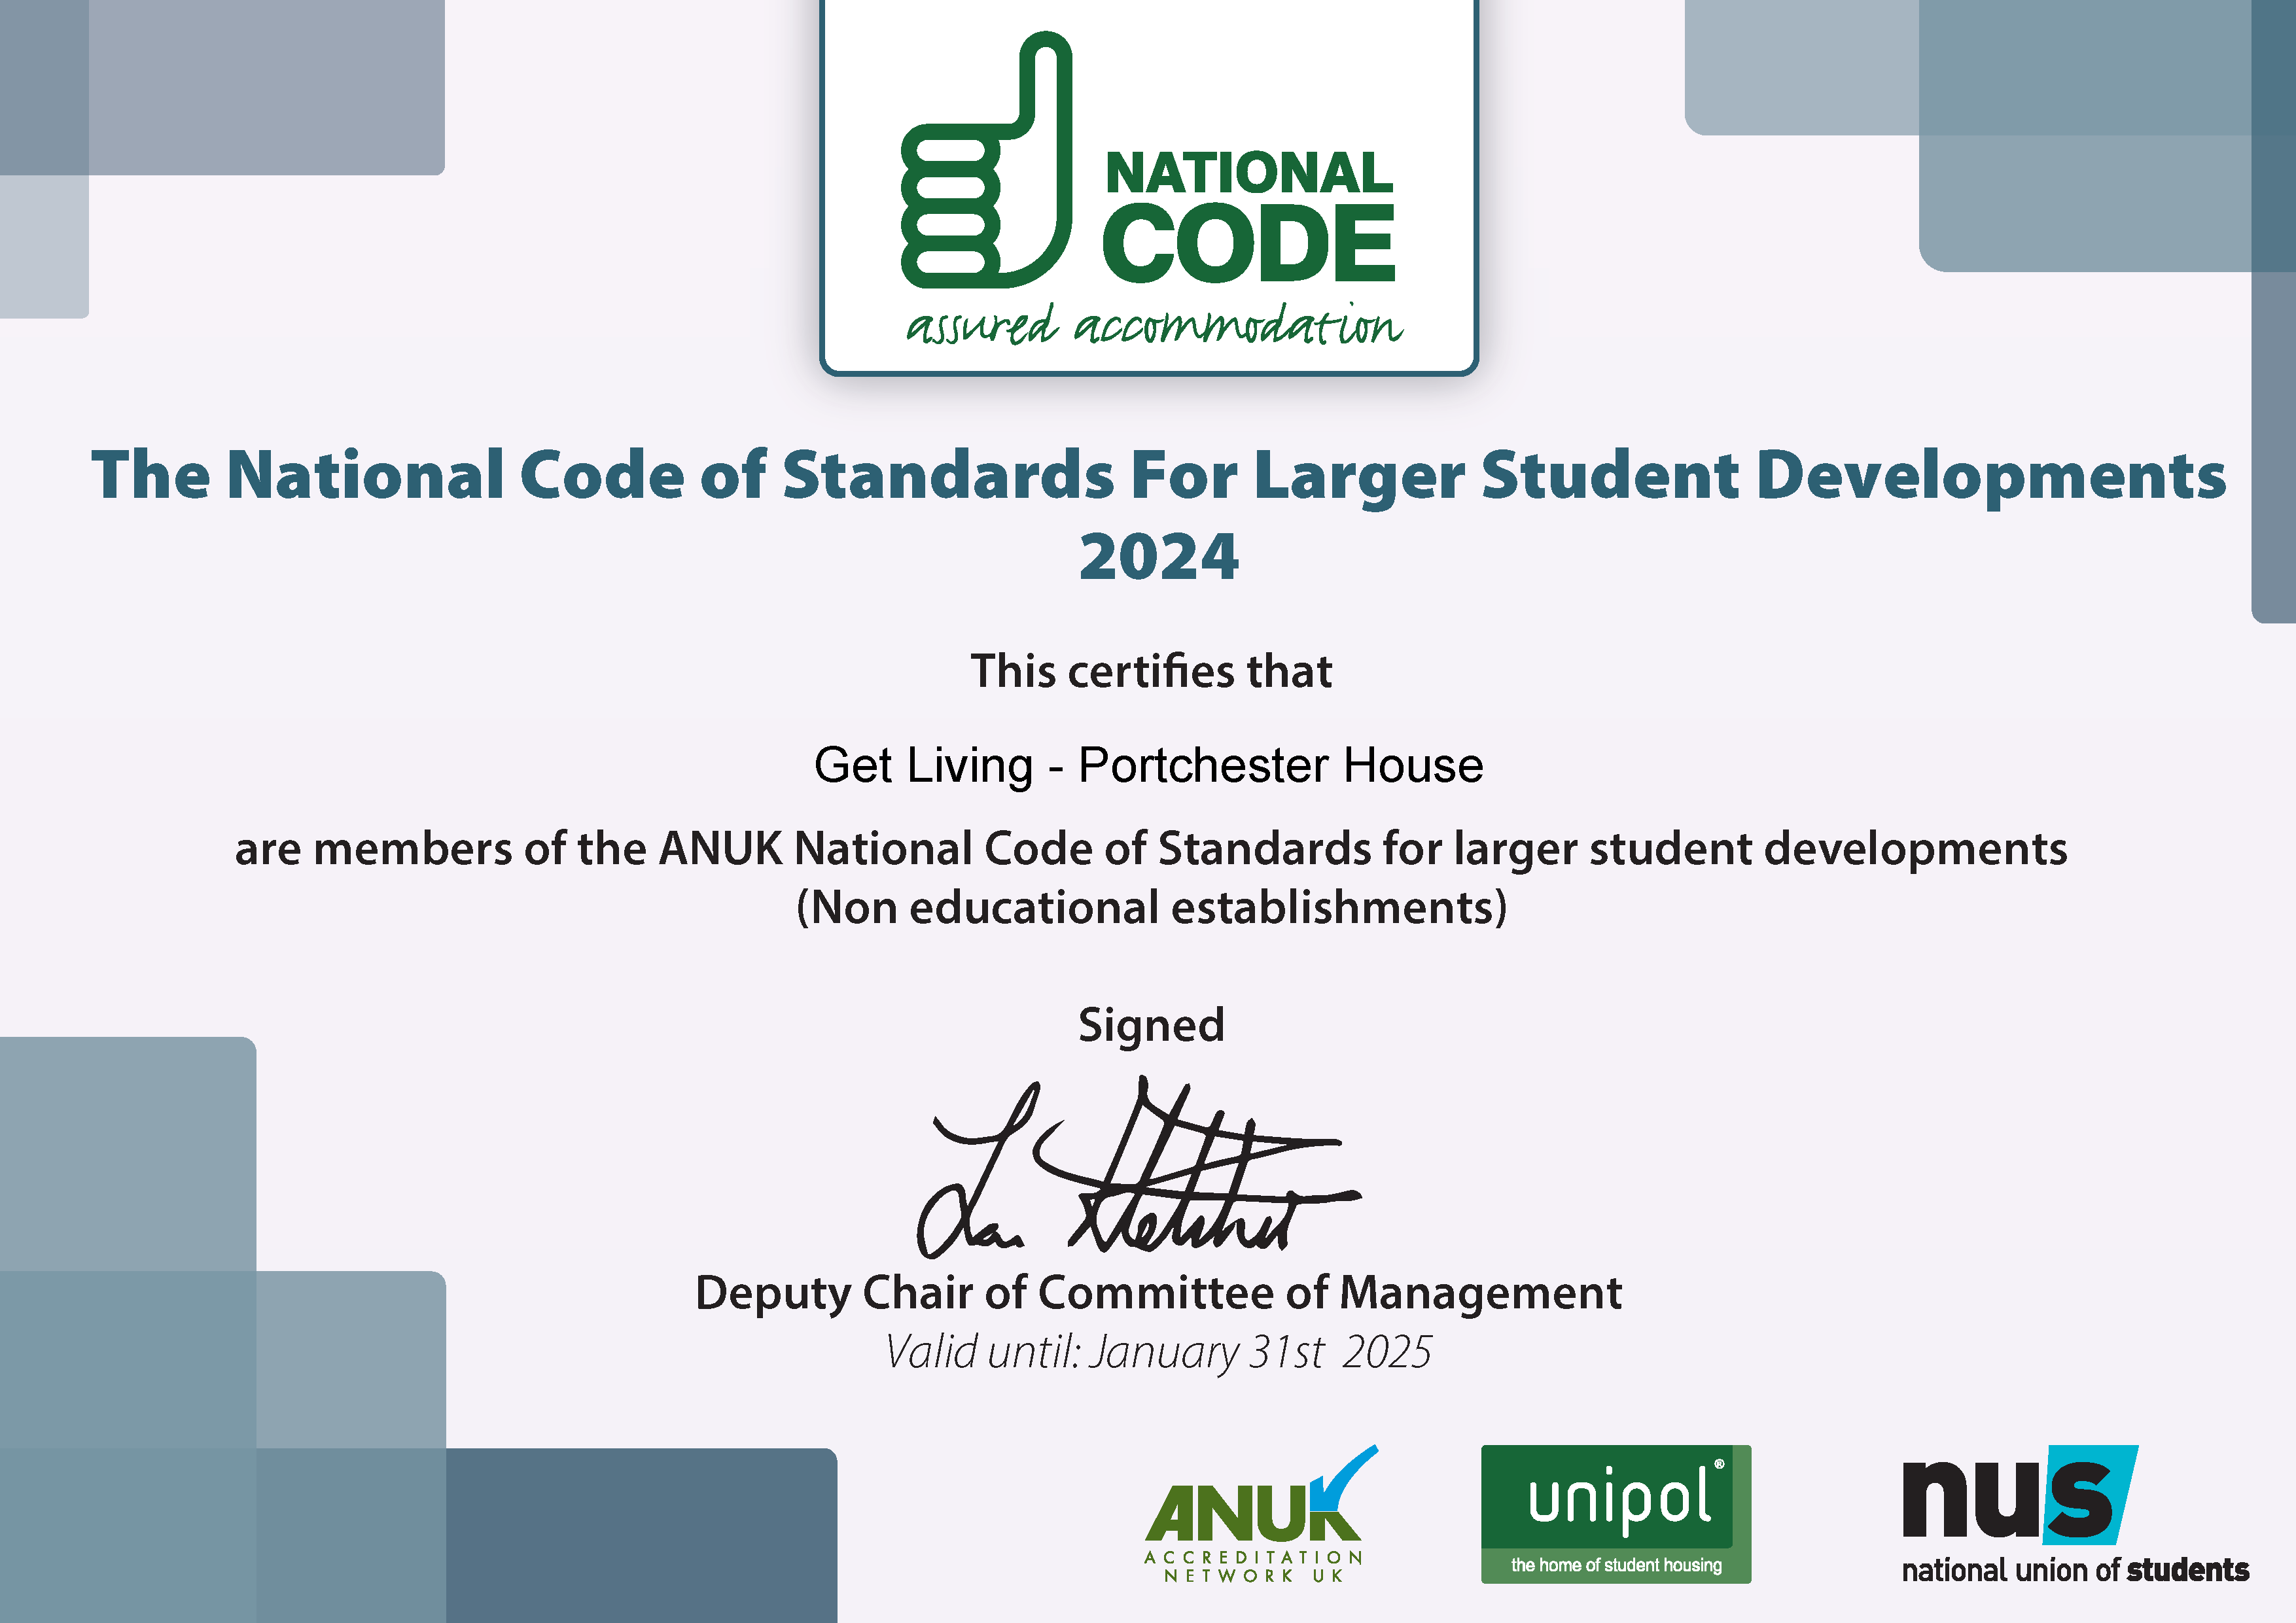 Certificate to confirm Portchester House are members of the ANUK National Code of Standards for larger student developments.